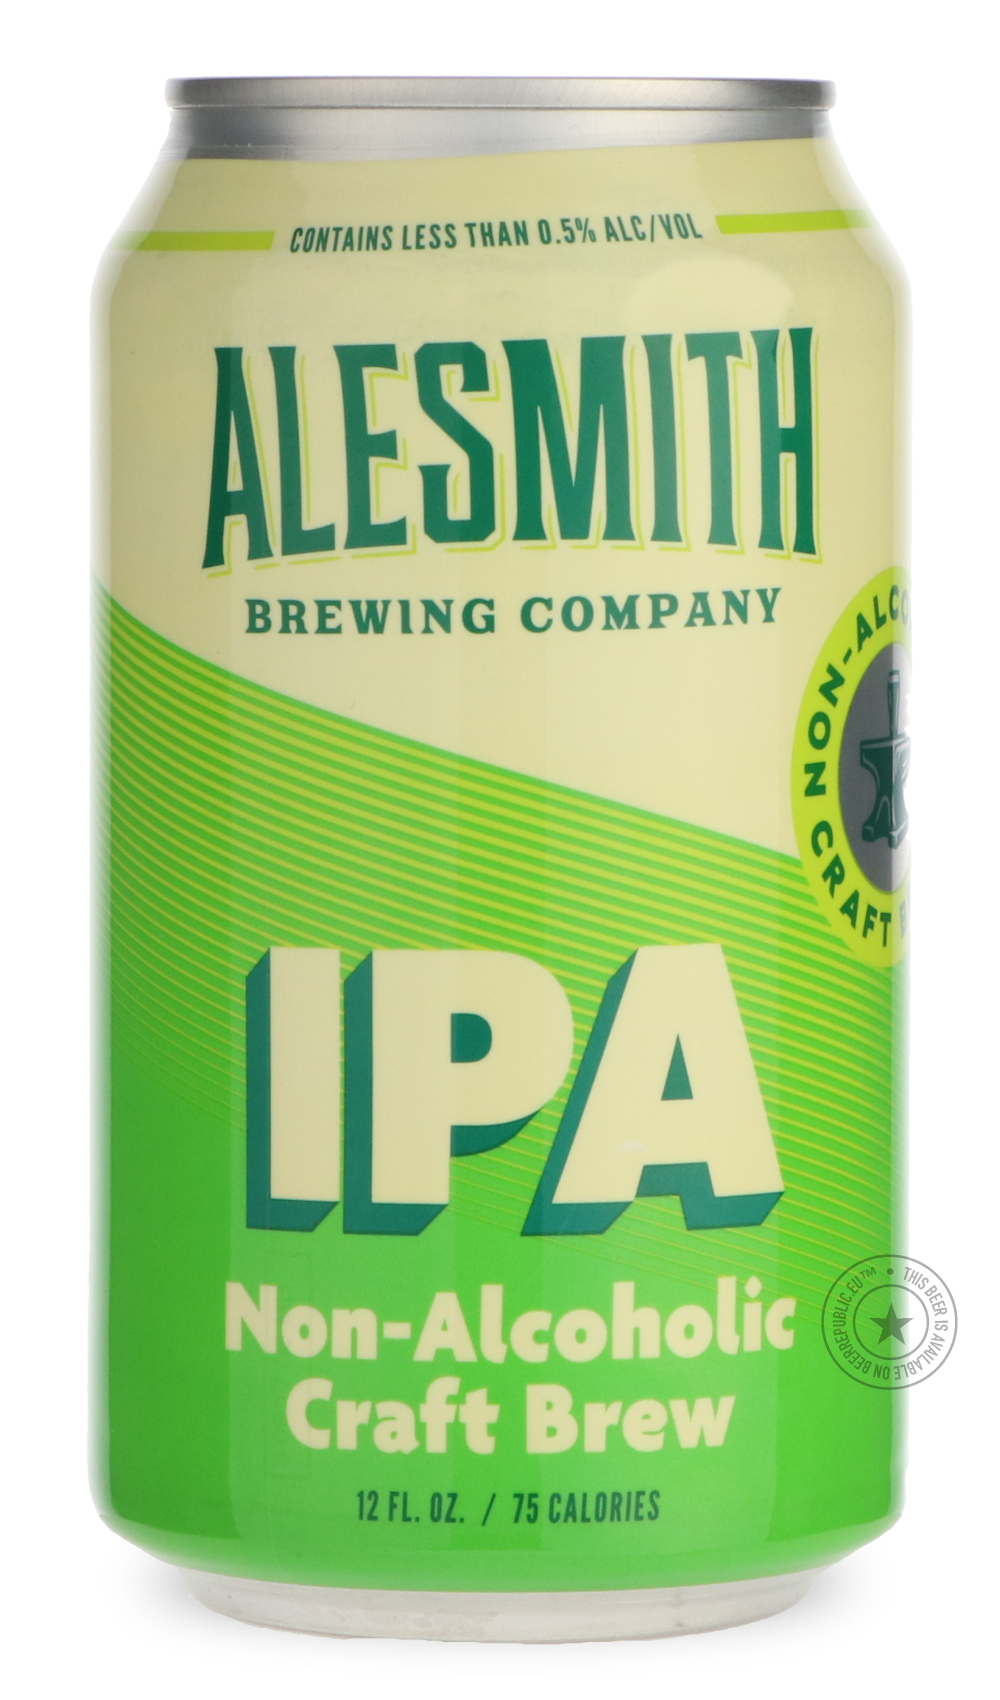 -AleSmith- Non-Alcoholic IPA-Specials- Only @ Beer Republic - The best online beer store for American & Canadian craft beer - Buy beer online from the USA and Canada - Bier online kopen - Amerikaans bier kopen - Craft beer store - Craft beer kopen - Amerikanisch bier kaufen - Bier online kaufen - Acheter biere online - IPA - Stout - Porter - New England IPA - Hazy IPA - Imperial Stout - Barrel Aged - Barrel Aged Imperial Stout - Brown - Dark beer - Blond - Blonde - Pilsner - Lager - Wheat - Weizen - Amber -